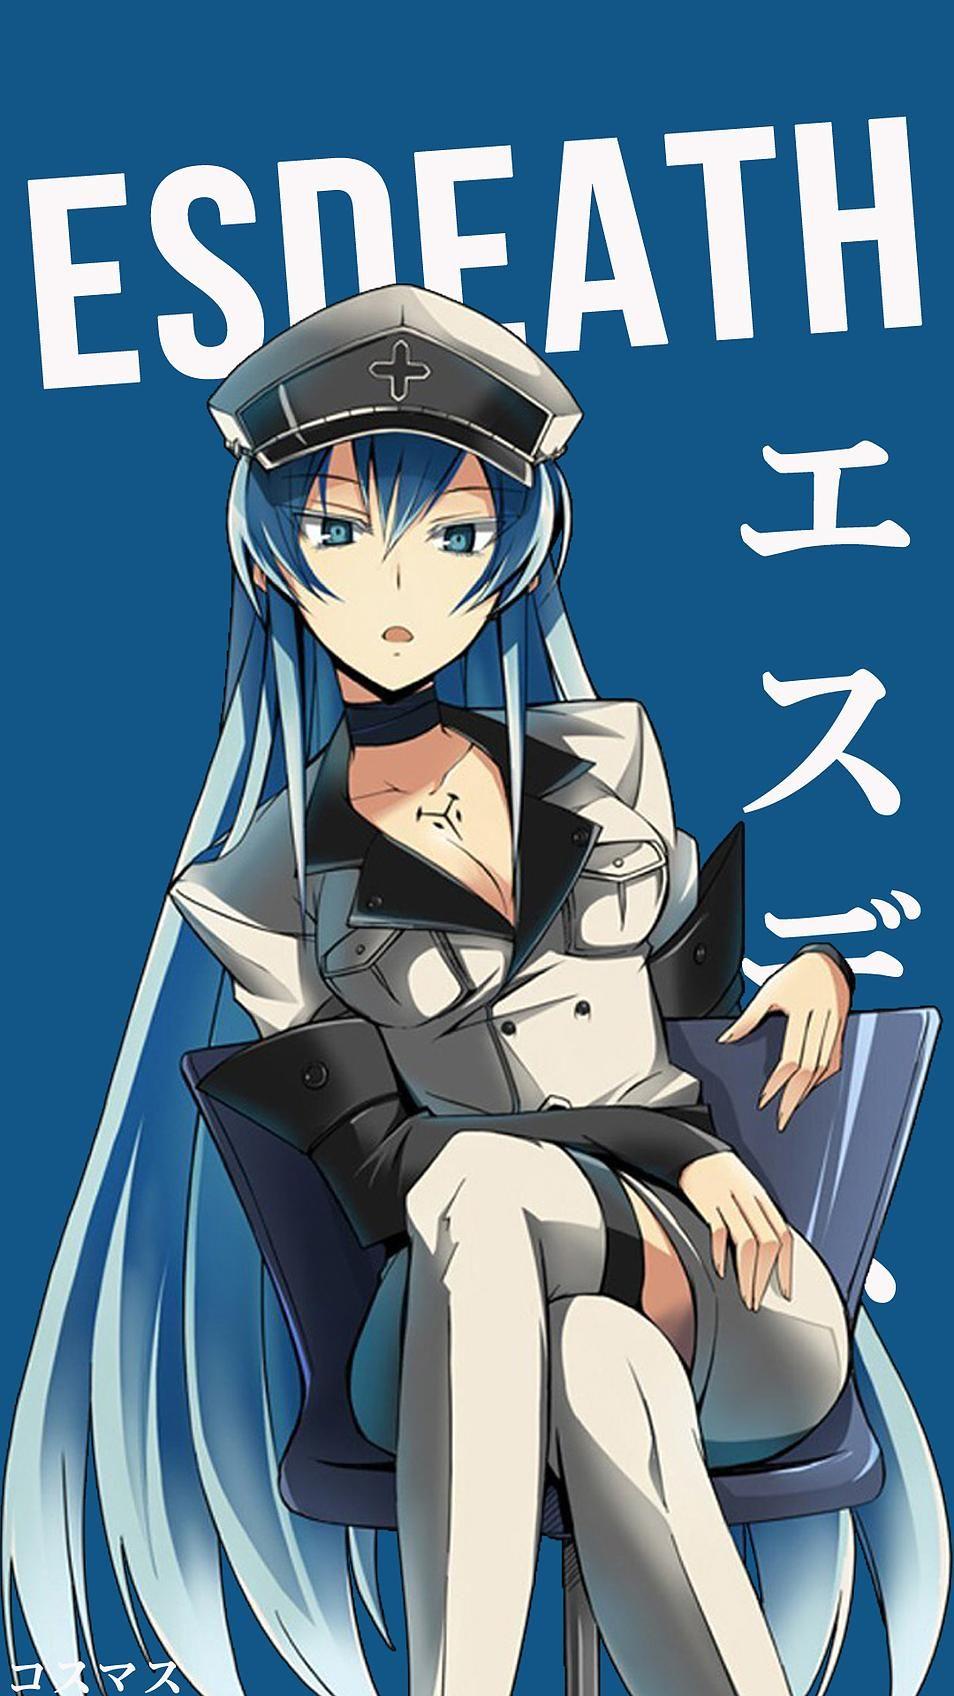 Download Esdeath Akame Ga Kill wallpapers for mobile phone free  Esdeath Akame Ga Kill HD pictures